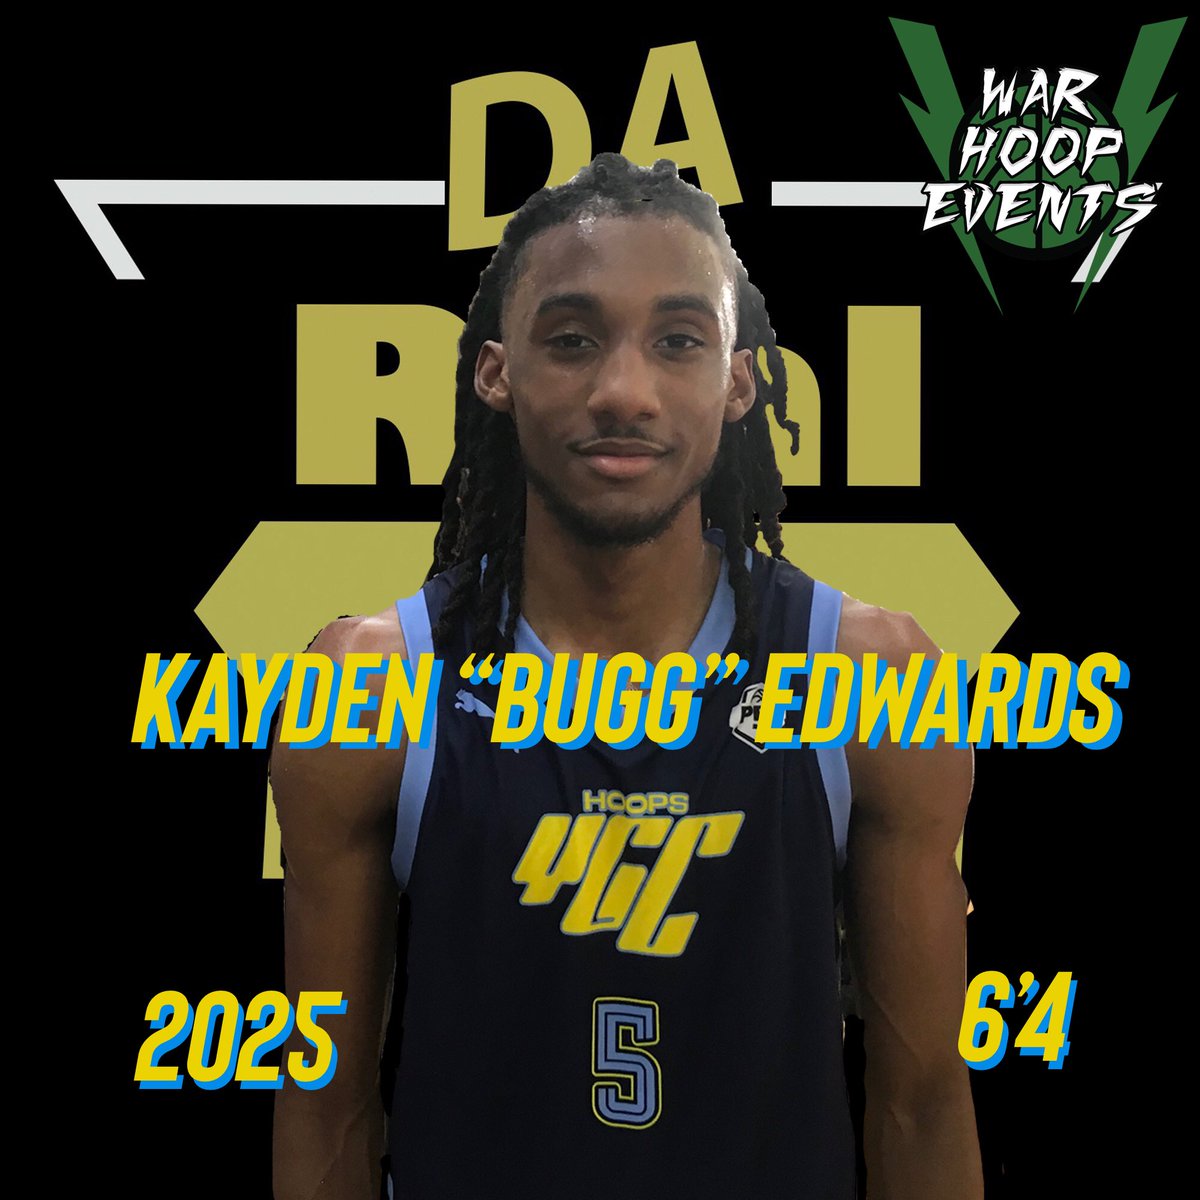 @Warb4storm 2024 recap: There were a lot studs but my MVP for this tourney, none other than @KaydenEdwards0 of @YGC_Hoops n @DuncanvilleBB ,,, I saw him drop 8 threes in a standing room only game,, 20pts in the 2nd half to help pull his team out the dub! #DaREALtalkNation